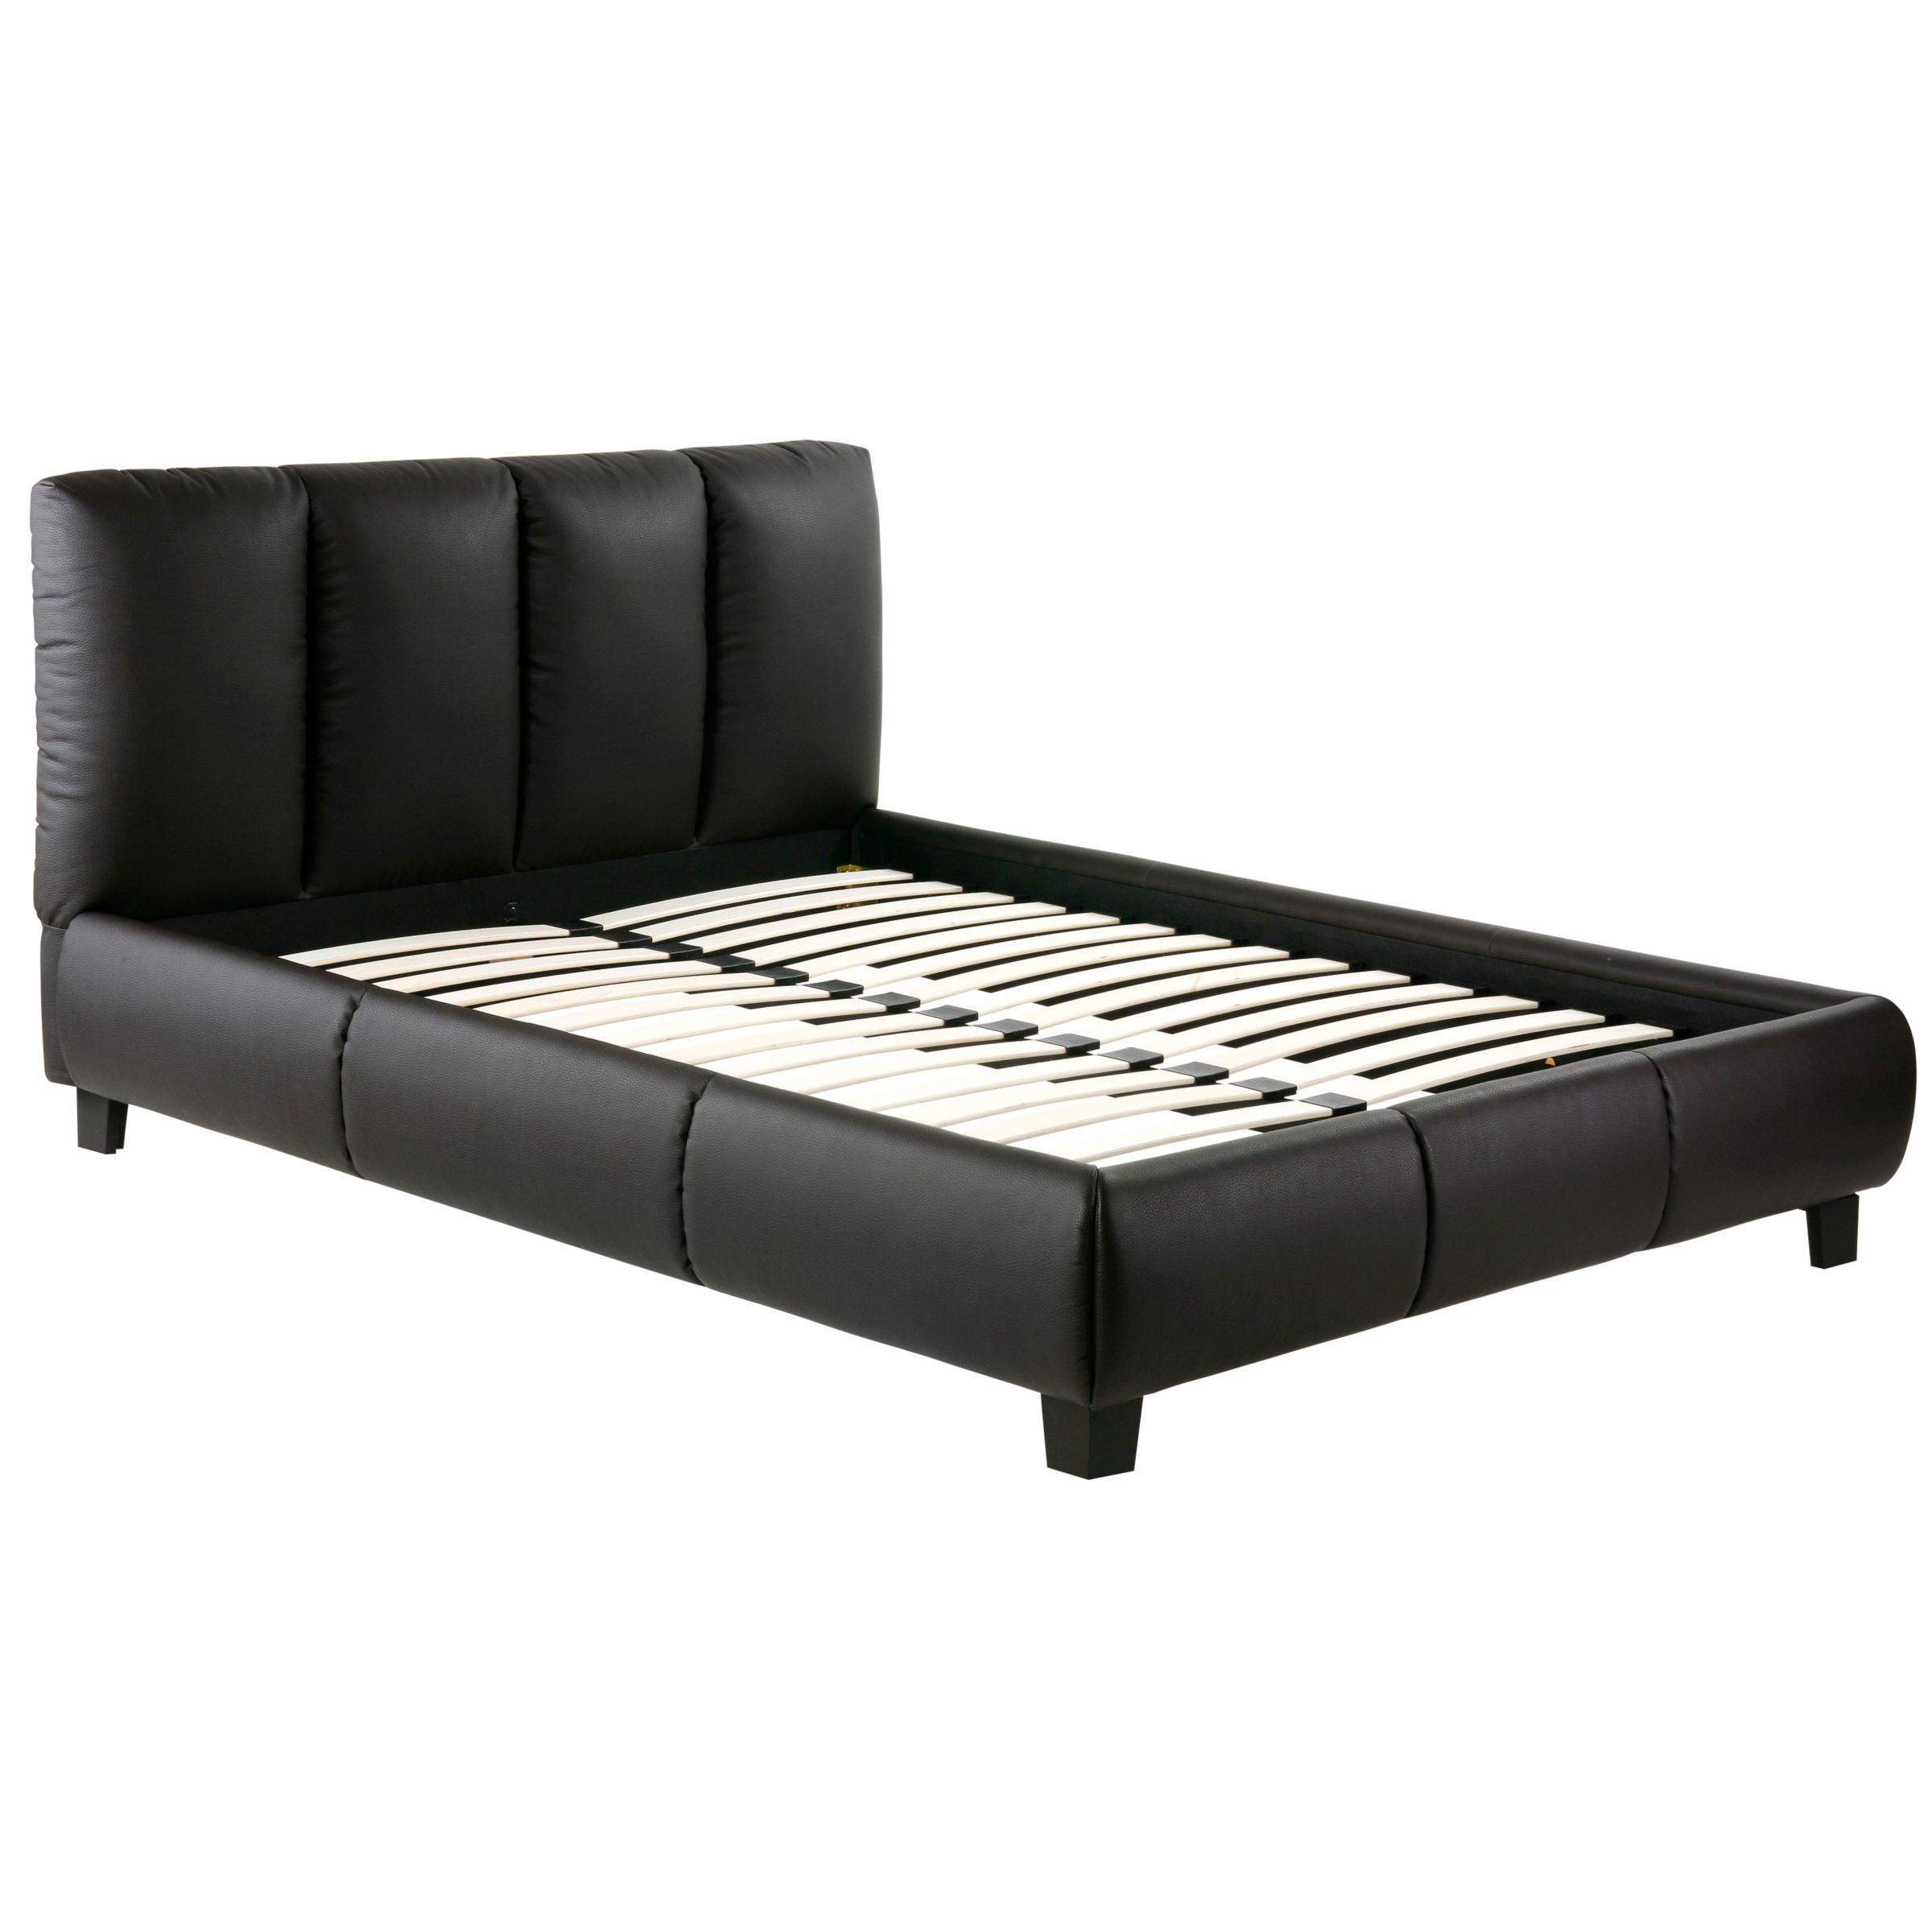 Georgia Faux Leather Bedstead, Double